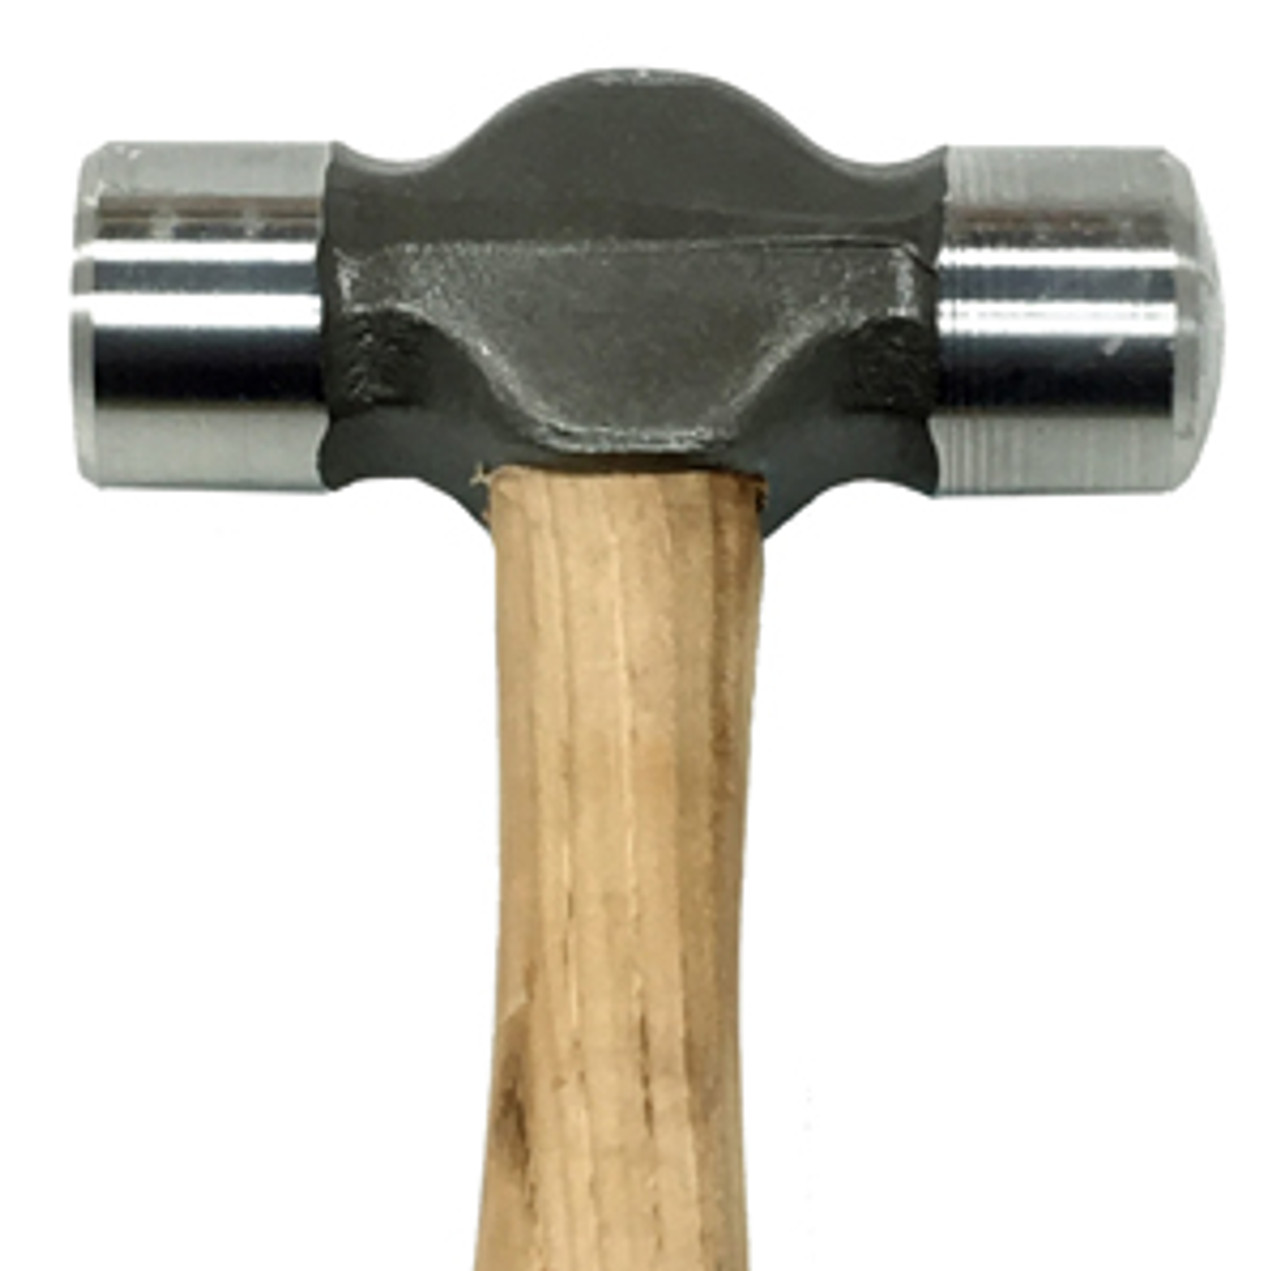 Nordic Forge 1 1/2 lb Farrier Rounding Hammer, 1 3/8 inch faces